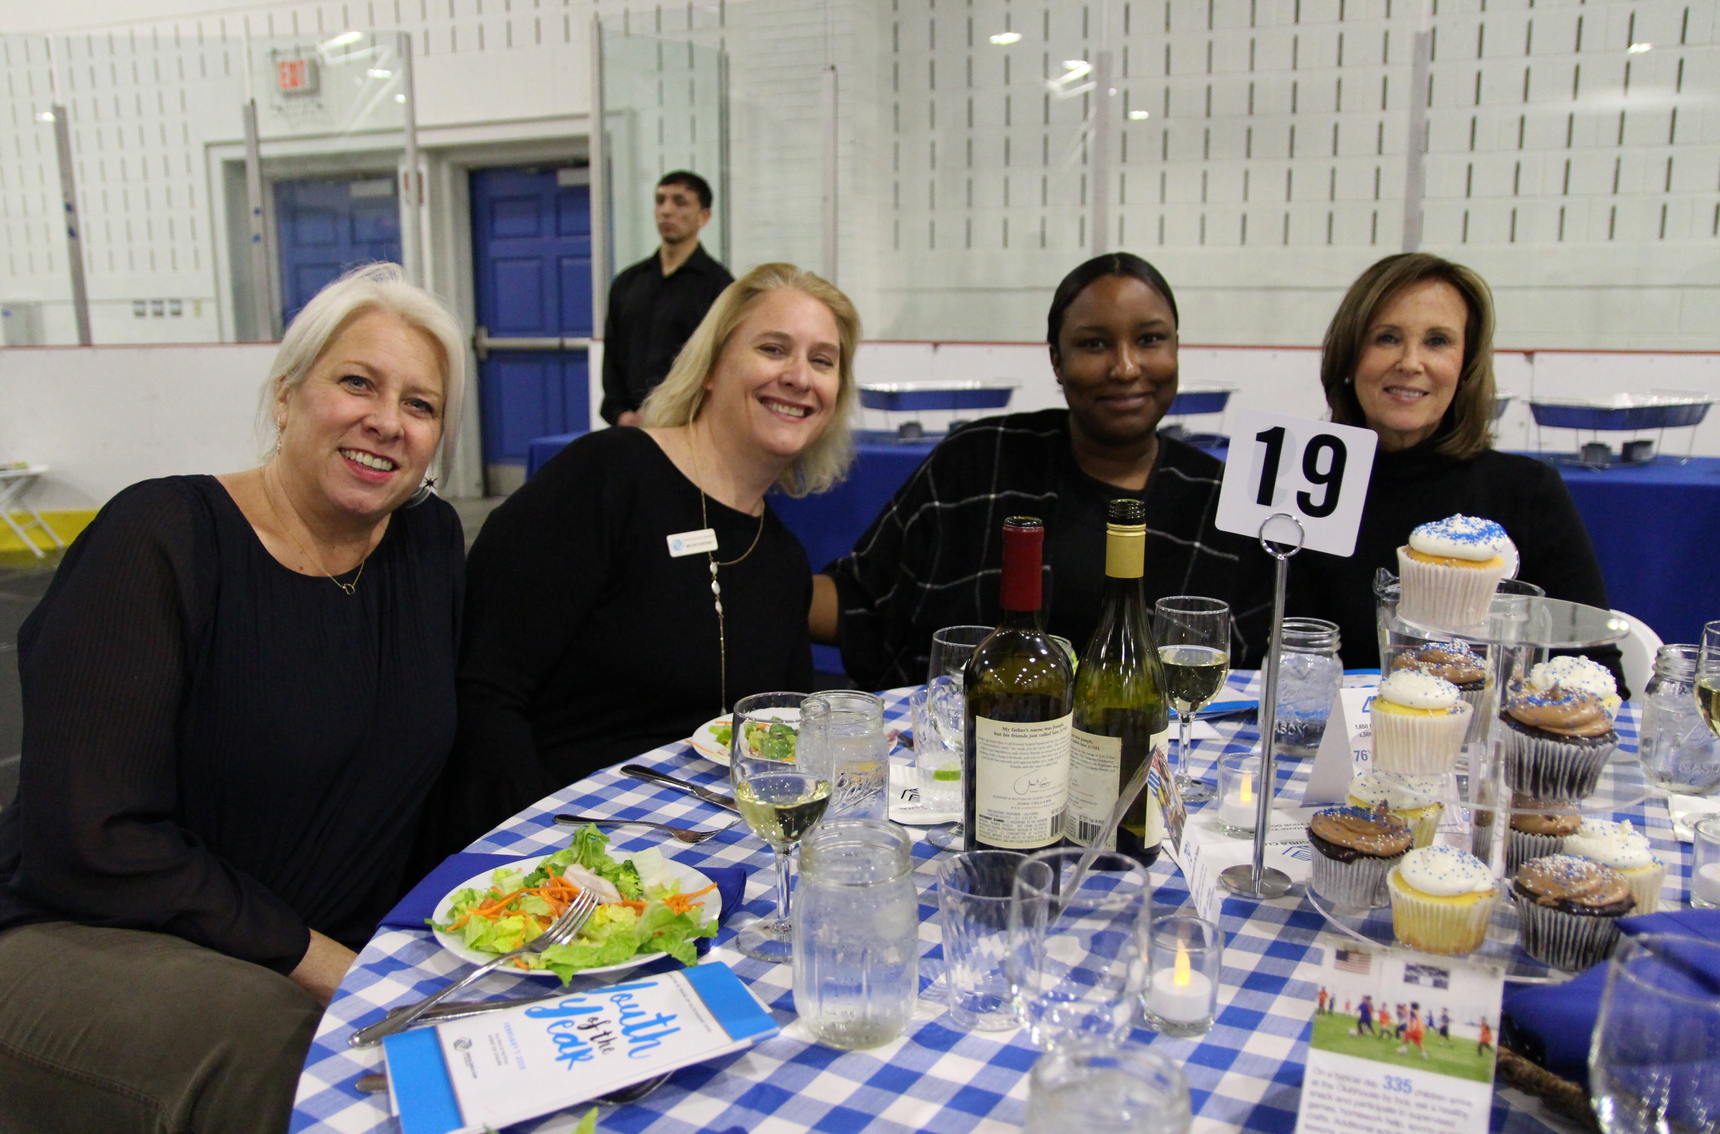 Dawn Berrocal, Megan Sweeney, Mindy Midy and MaryAnn Smith at the Boys & Girls Club of Greenwich Youth of the Year event. Feb 7, 2019 Photo: Leslie Yager